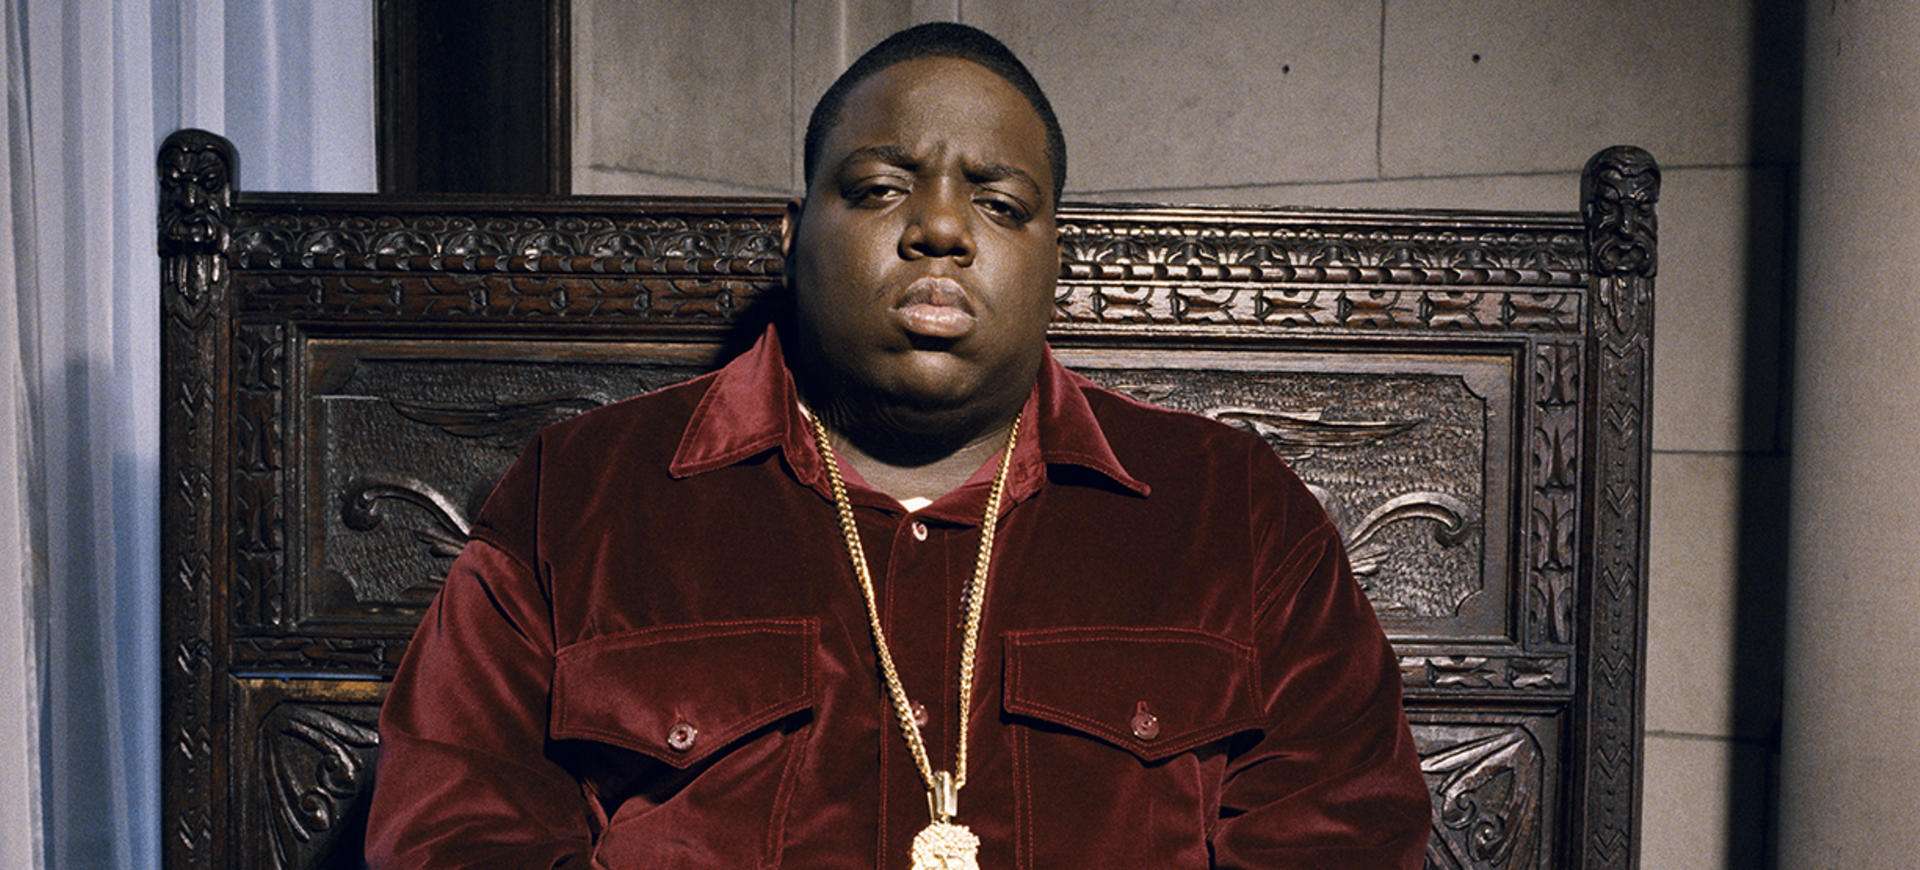 It Was All a Dream: Biggie and the World That Made Him